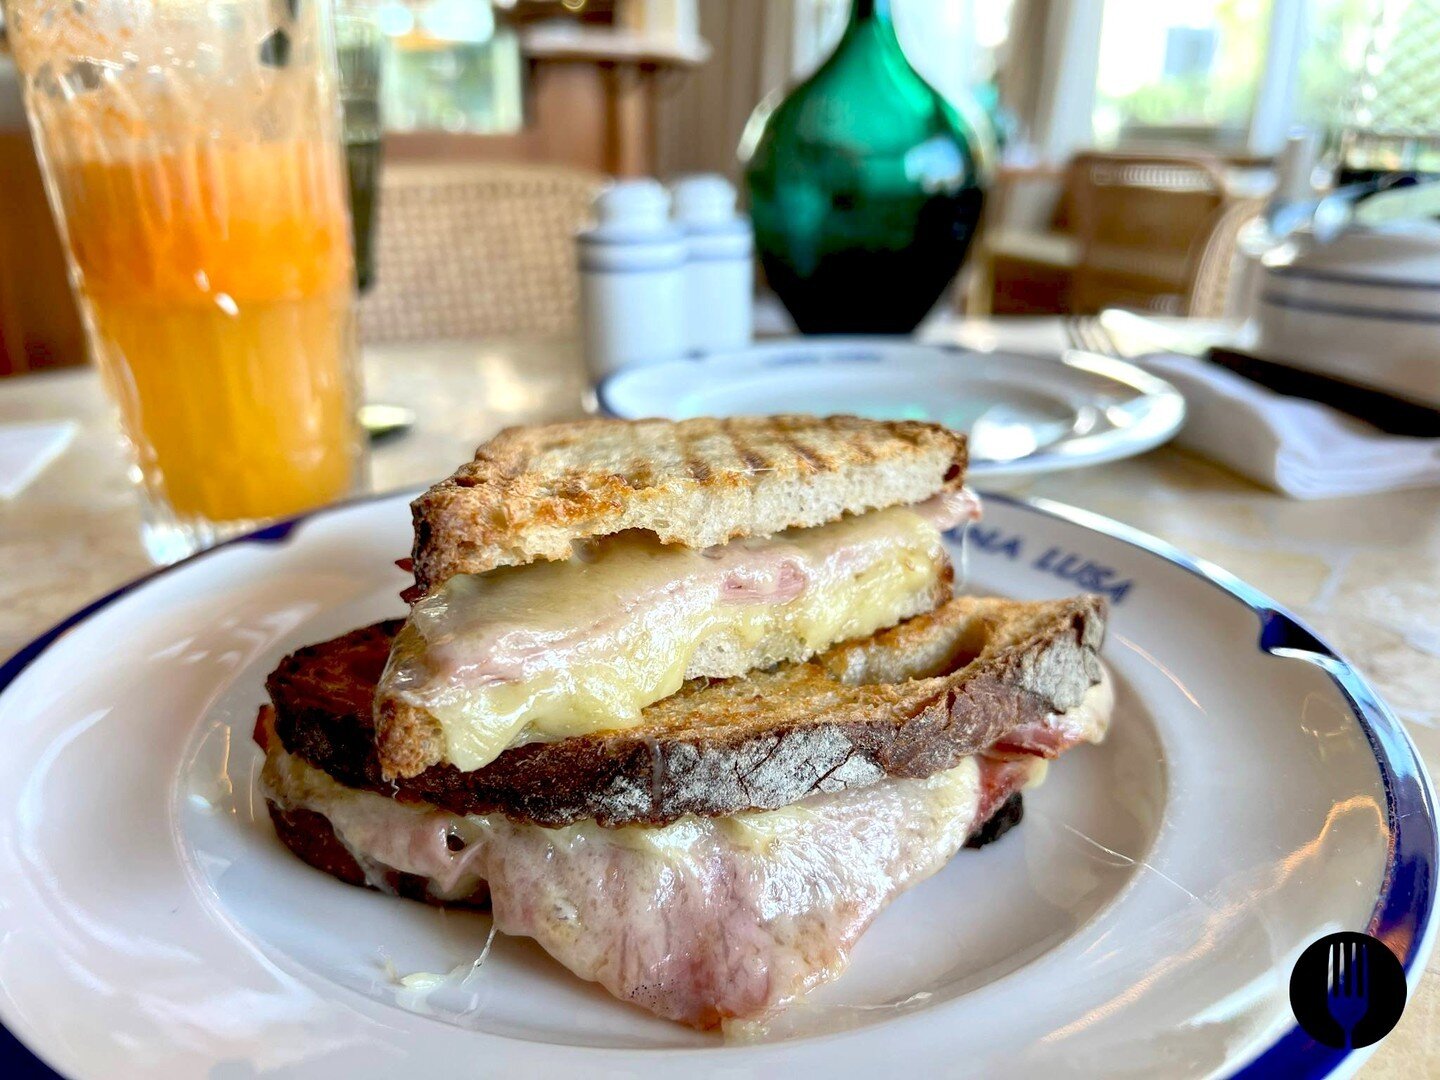 We love food, we love passion and we love the passion for food. It would seem so does Lana Lusa. ⁠
⁠
What's on the Fork: ⁠
⁠
Tosta Mista ⁠
Toasted sourdough bread, ham and that oozing melted cheese. @lanalunadxb @mydubai @dubai ⁠
#brekkie #bacon #bre